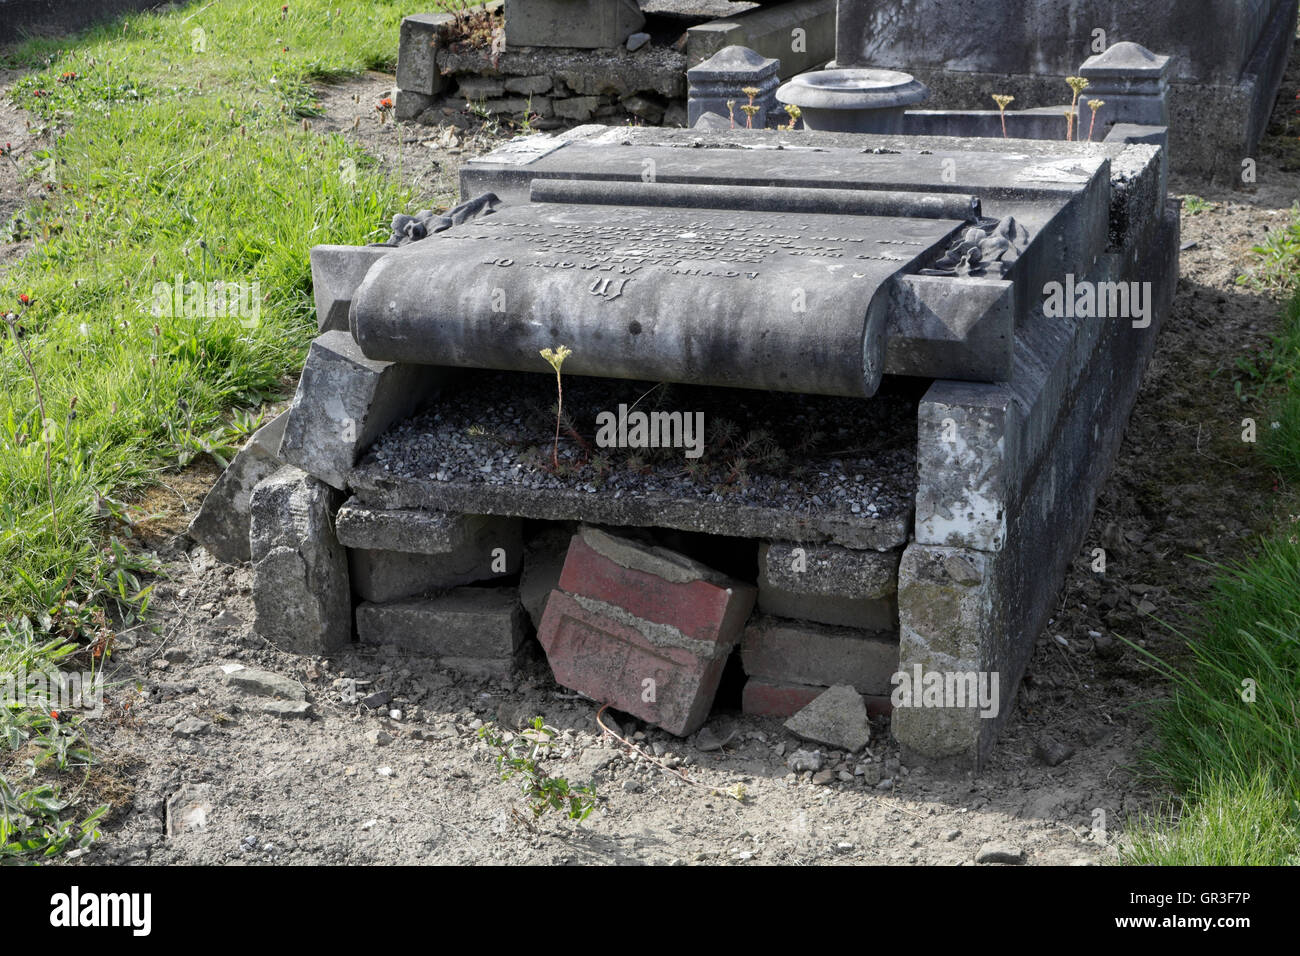 Unkept Graves poorly maintained Stock Photo